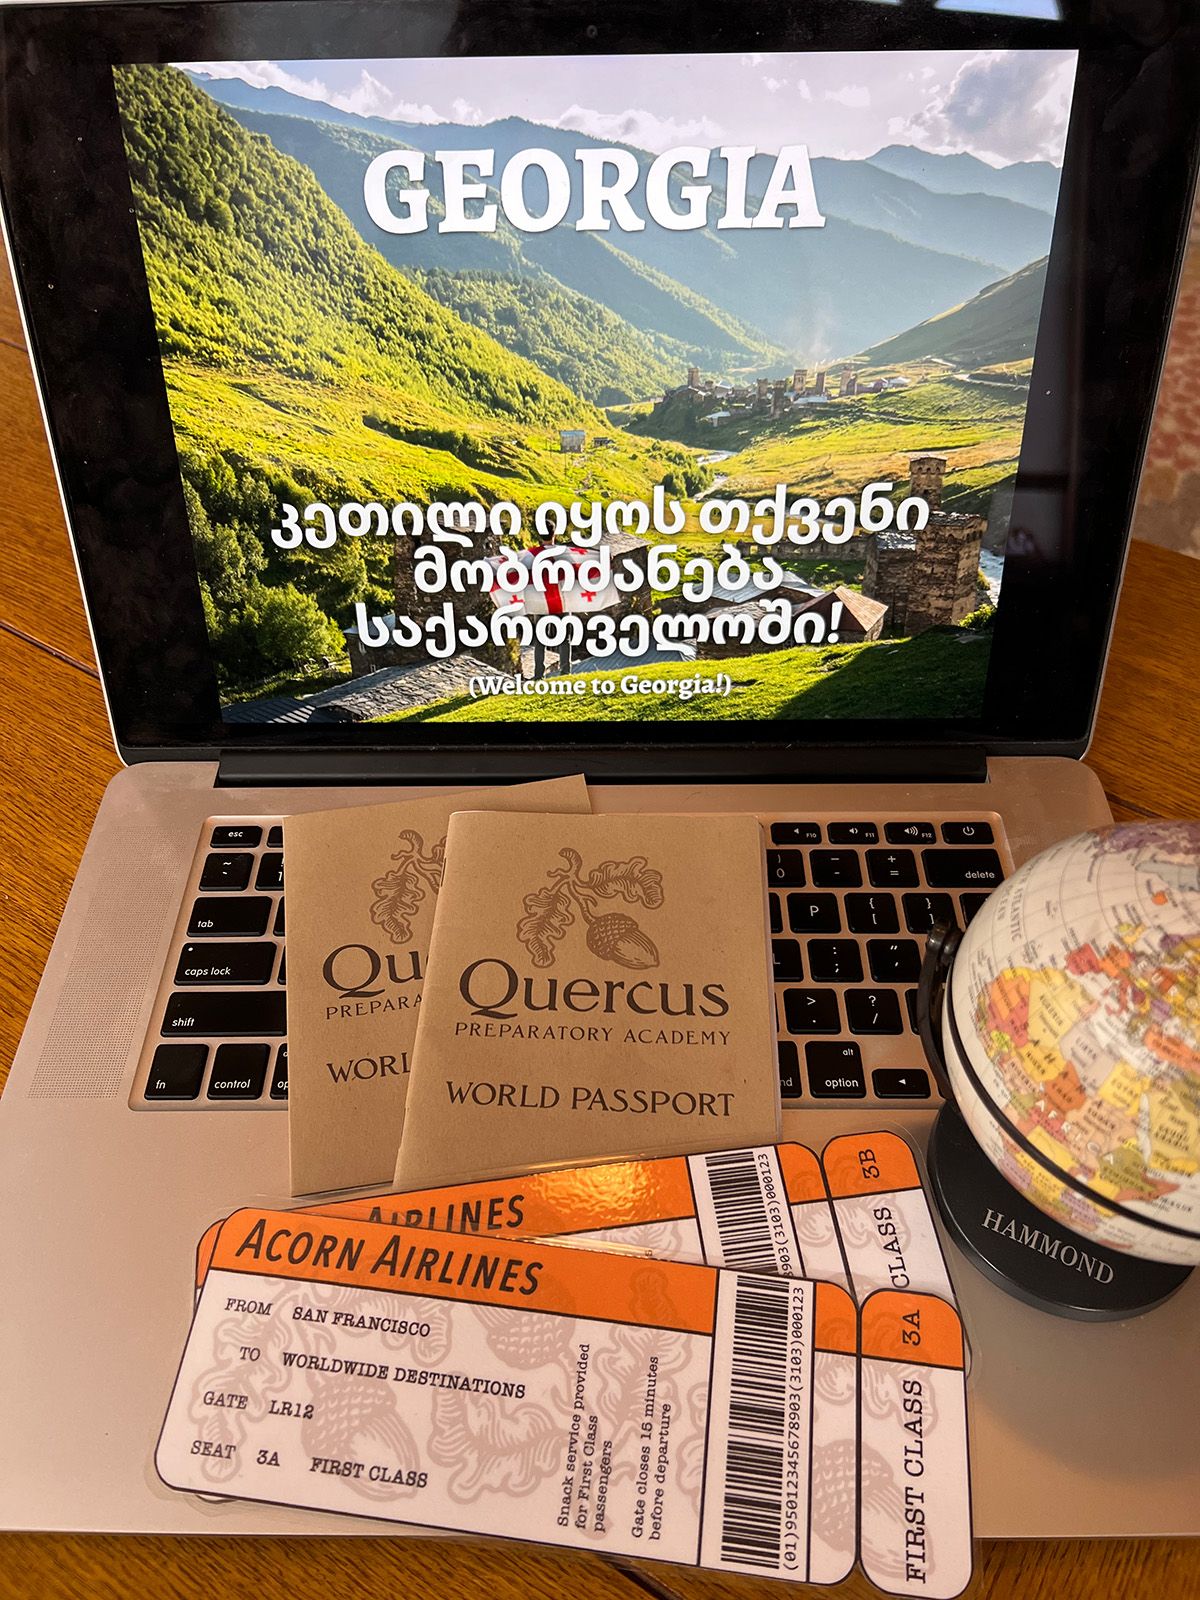 Laptop screen showing a presentation saying "Welcome to Georgia!," with a Quercus Prep passport and Acorn Airlines plane tickets on the keyboard.